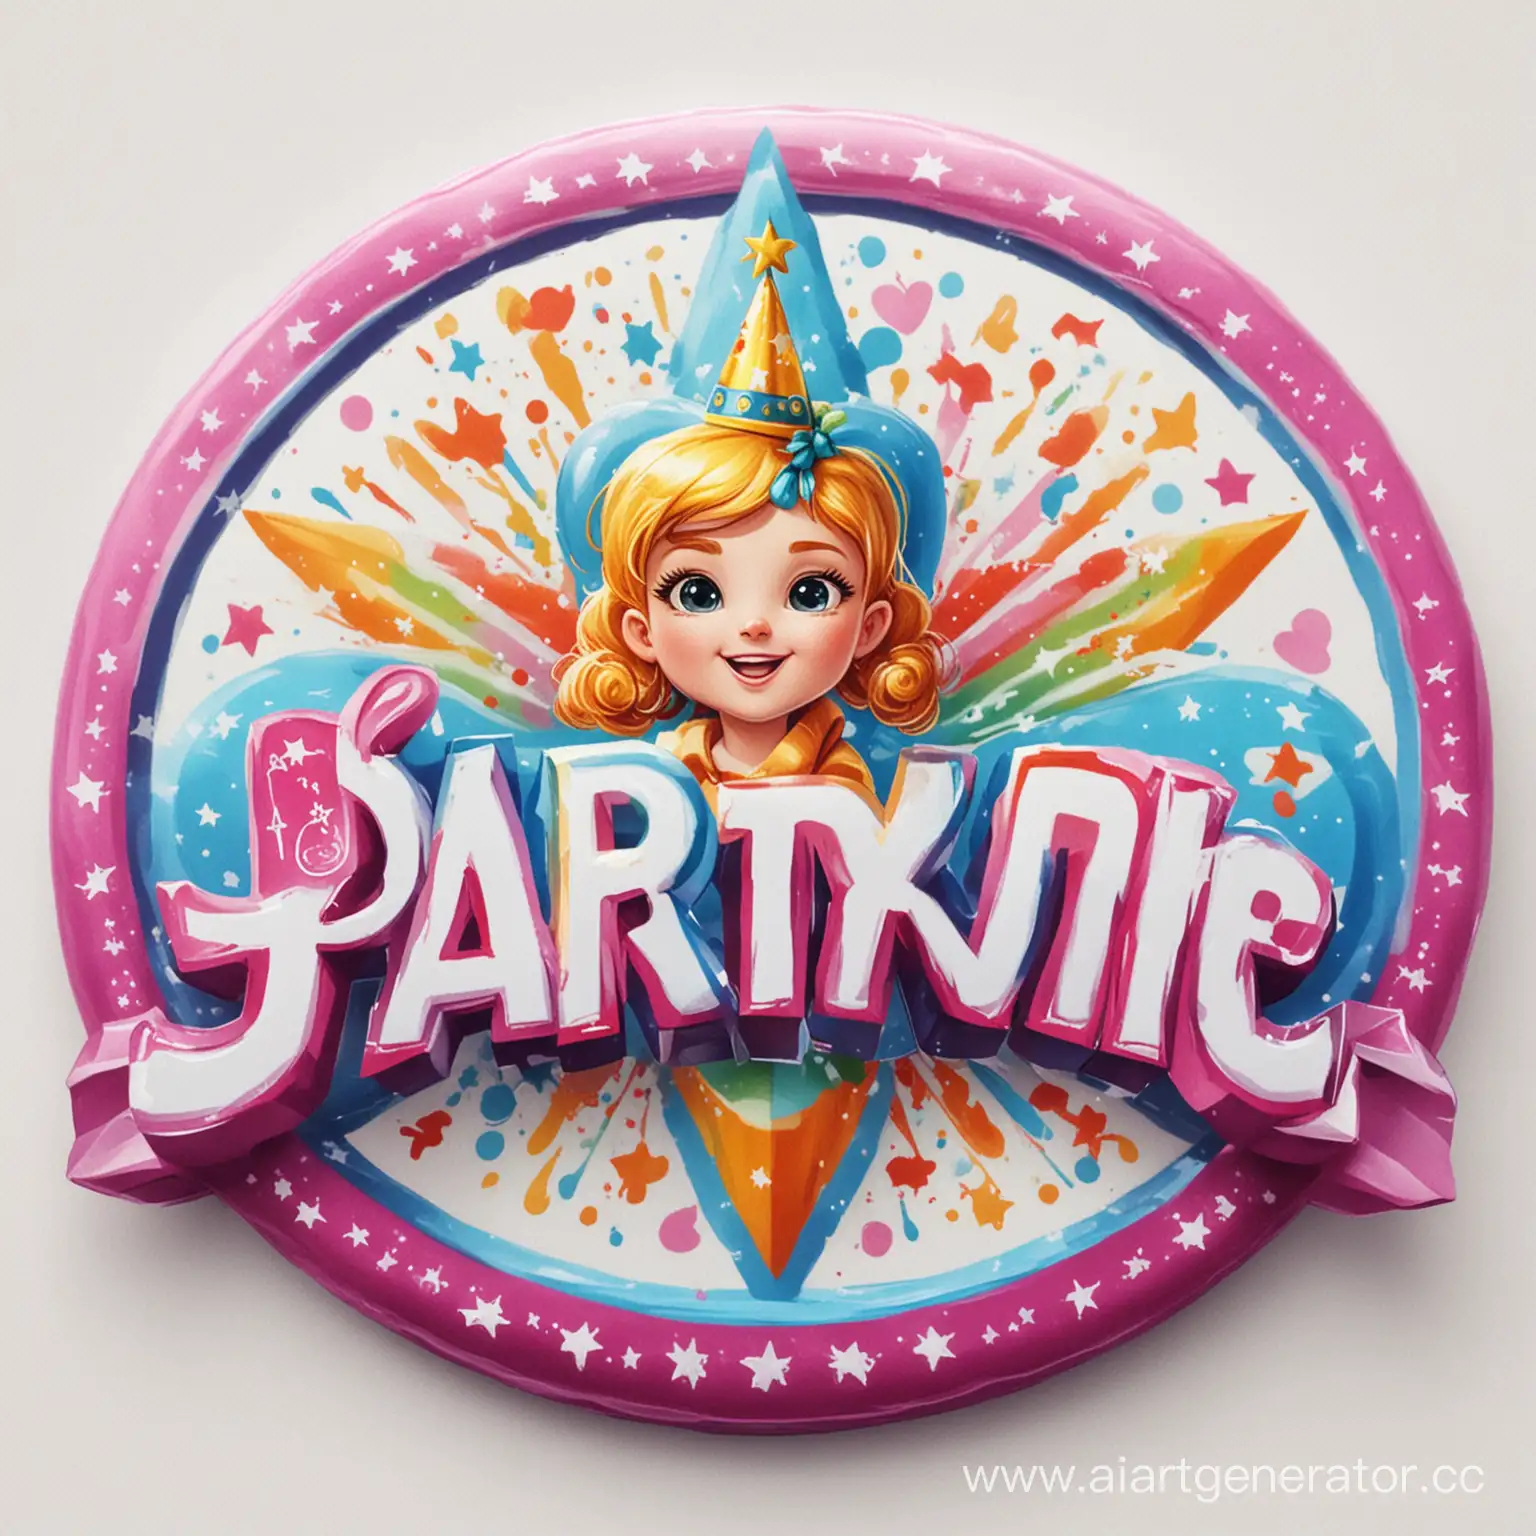 Vibrant-Childrens-Party-Logo-PLAY-Logo-with-Colorful-Balloons-and-Confetti